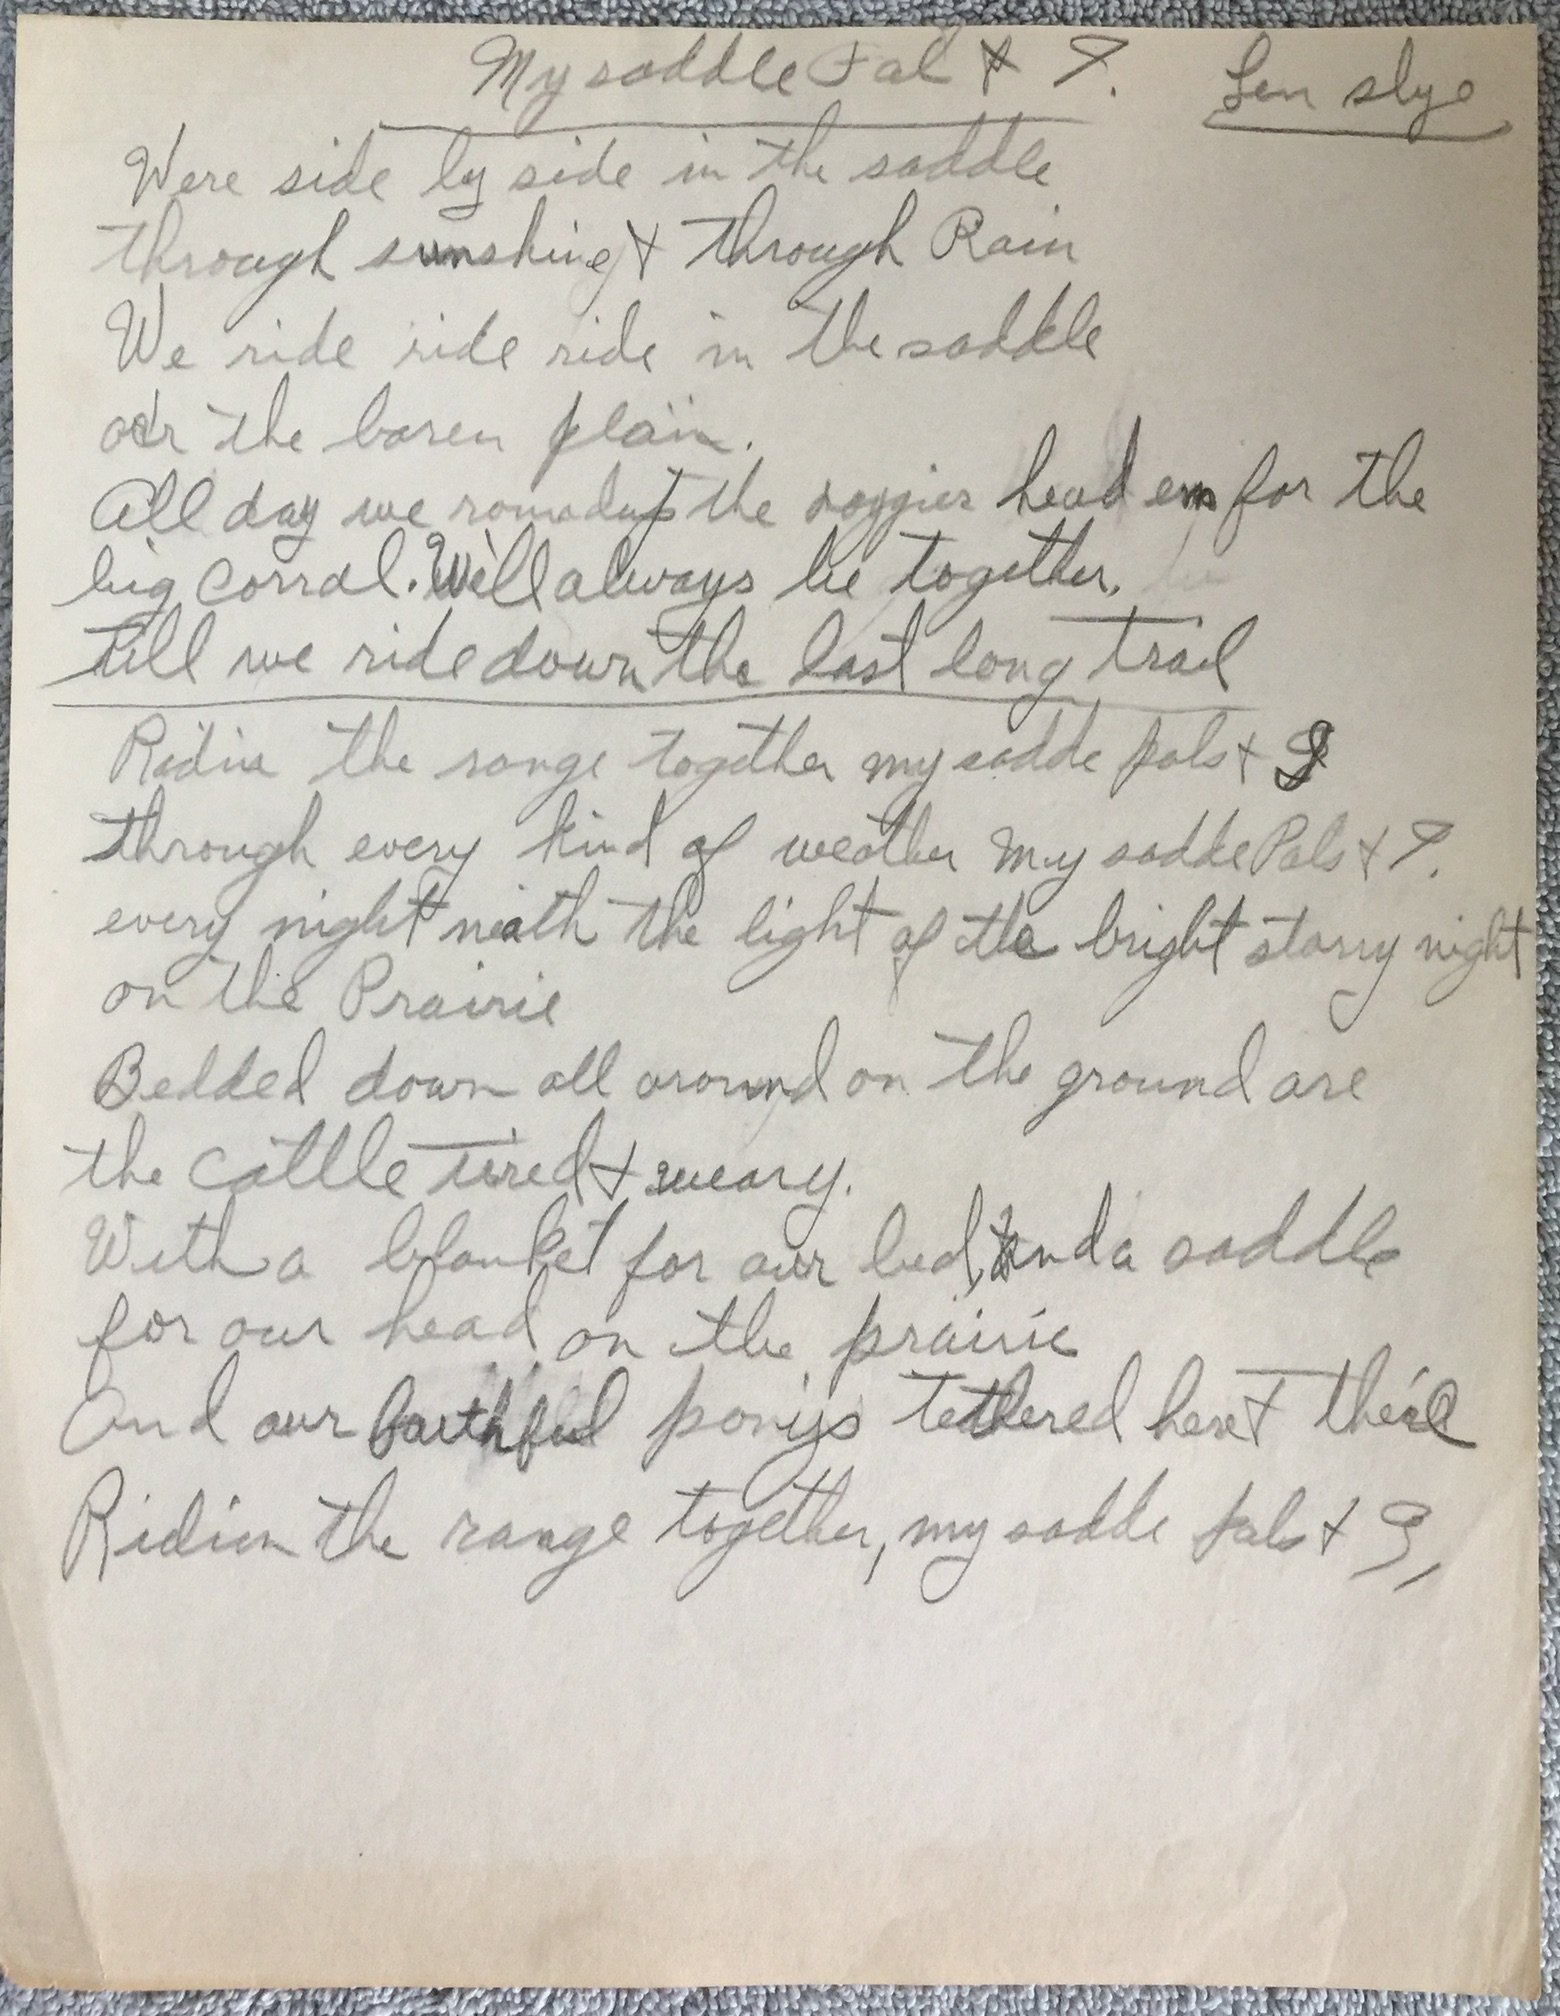 Lynch collection - Roy Rogers Sons of the Pioneers My Saddle Pal pencil lyrics authenticated  - image5 - 5-21-2022.jpeg